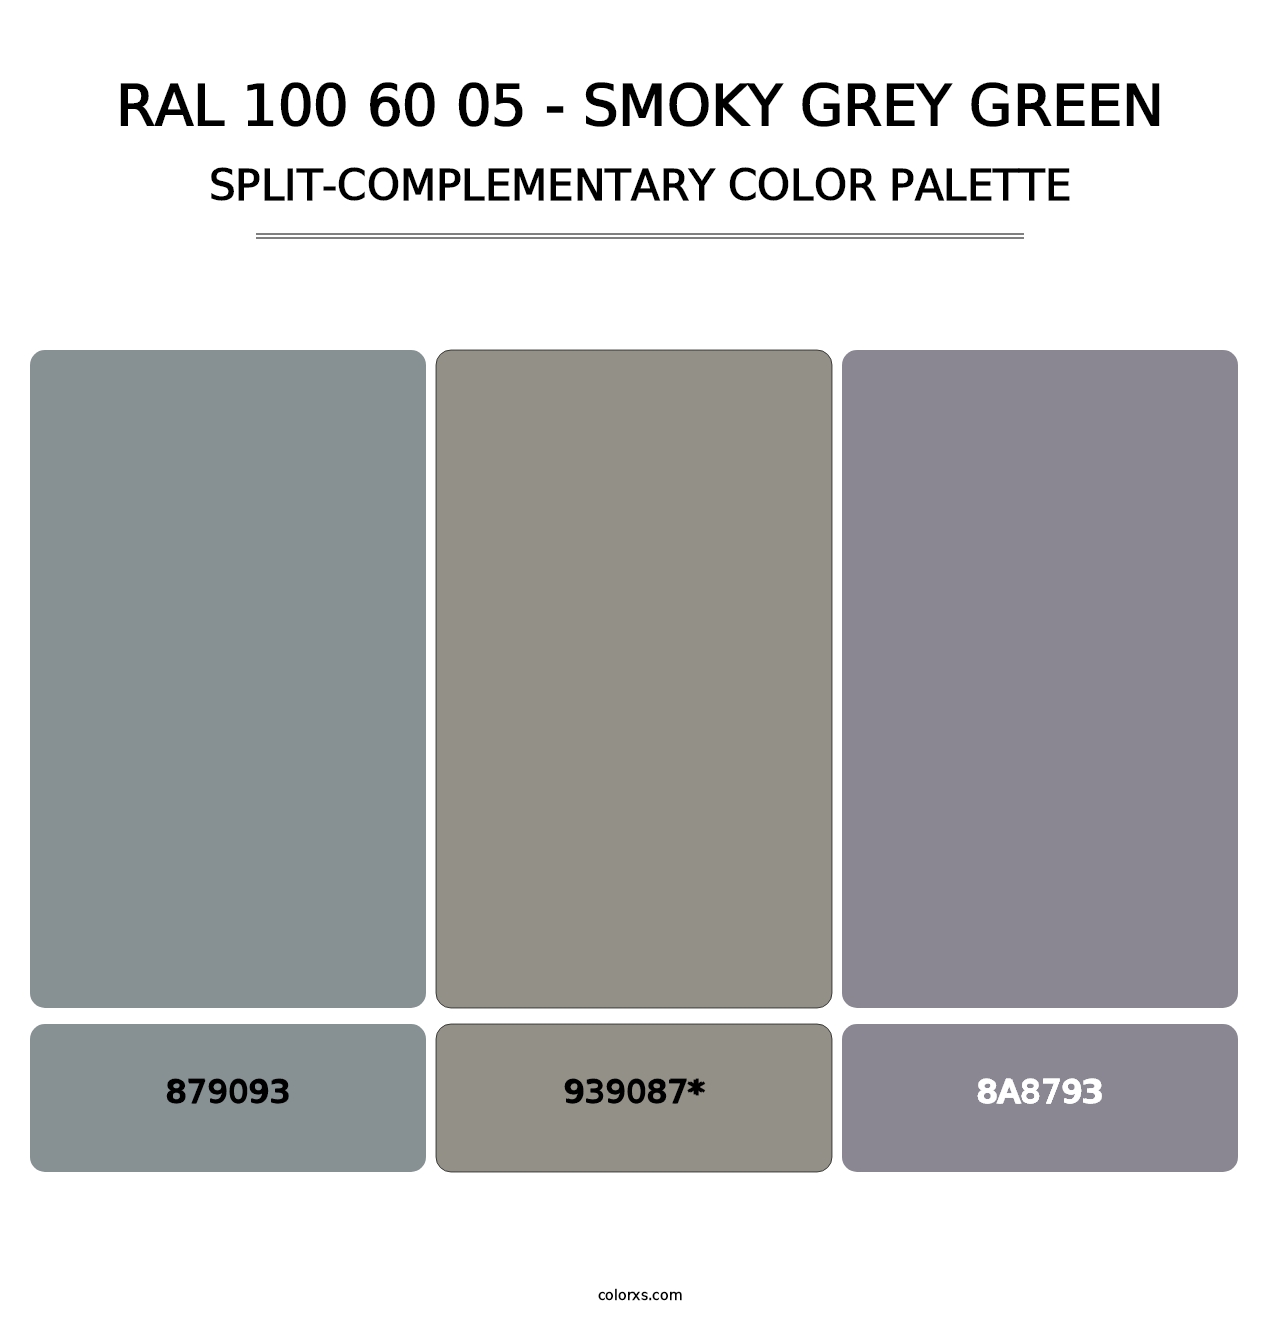 RAL 100 60 05 - Smoky Grey Green - Split-Complementary Color Palette